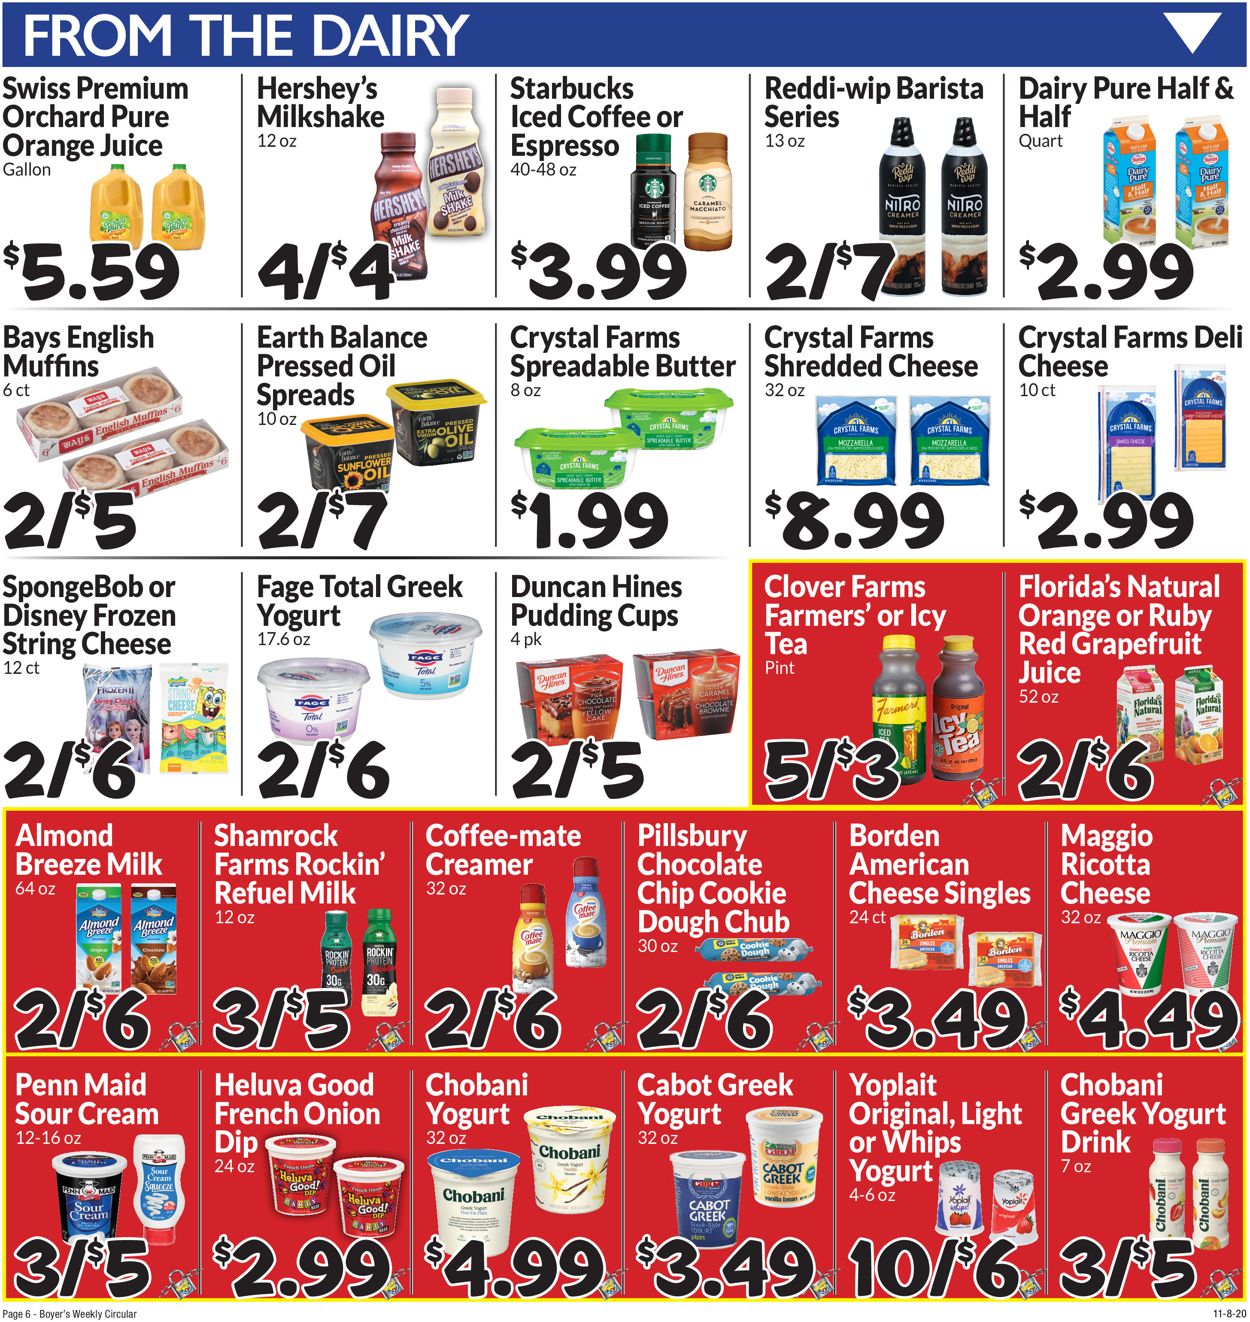 Boyer's Food Markets Current weekly ad 11/12 - 11/14/2020 [9 ...